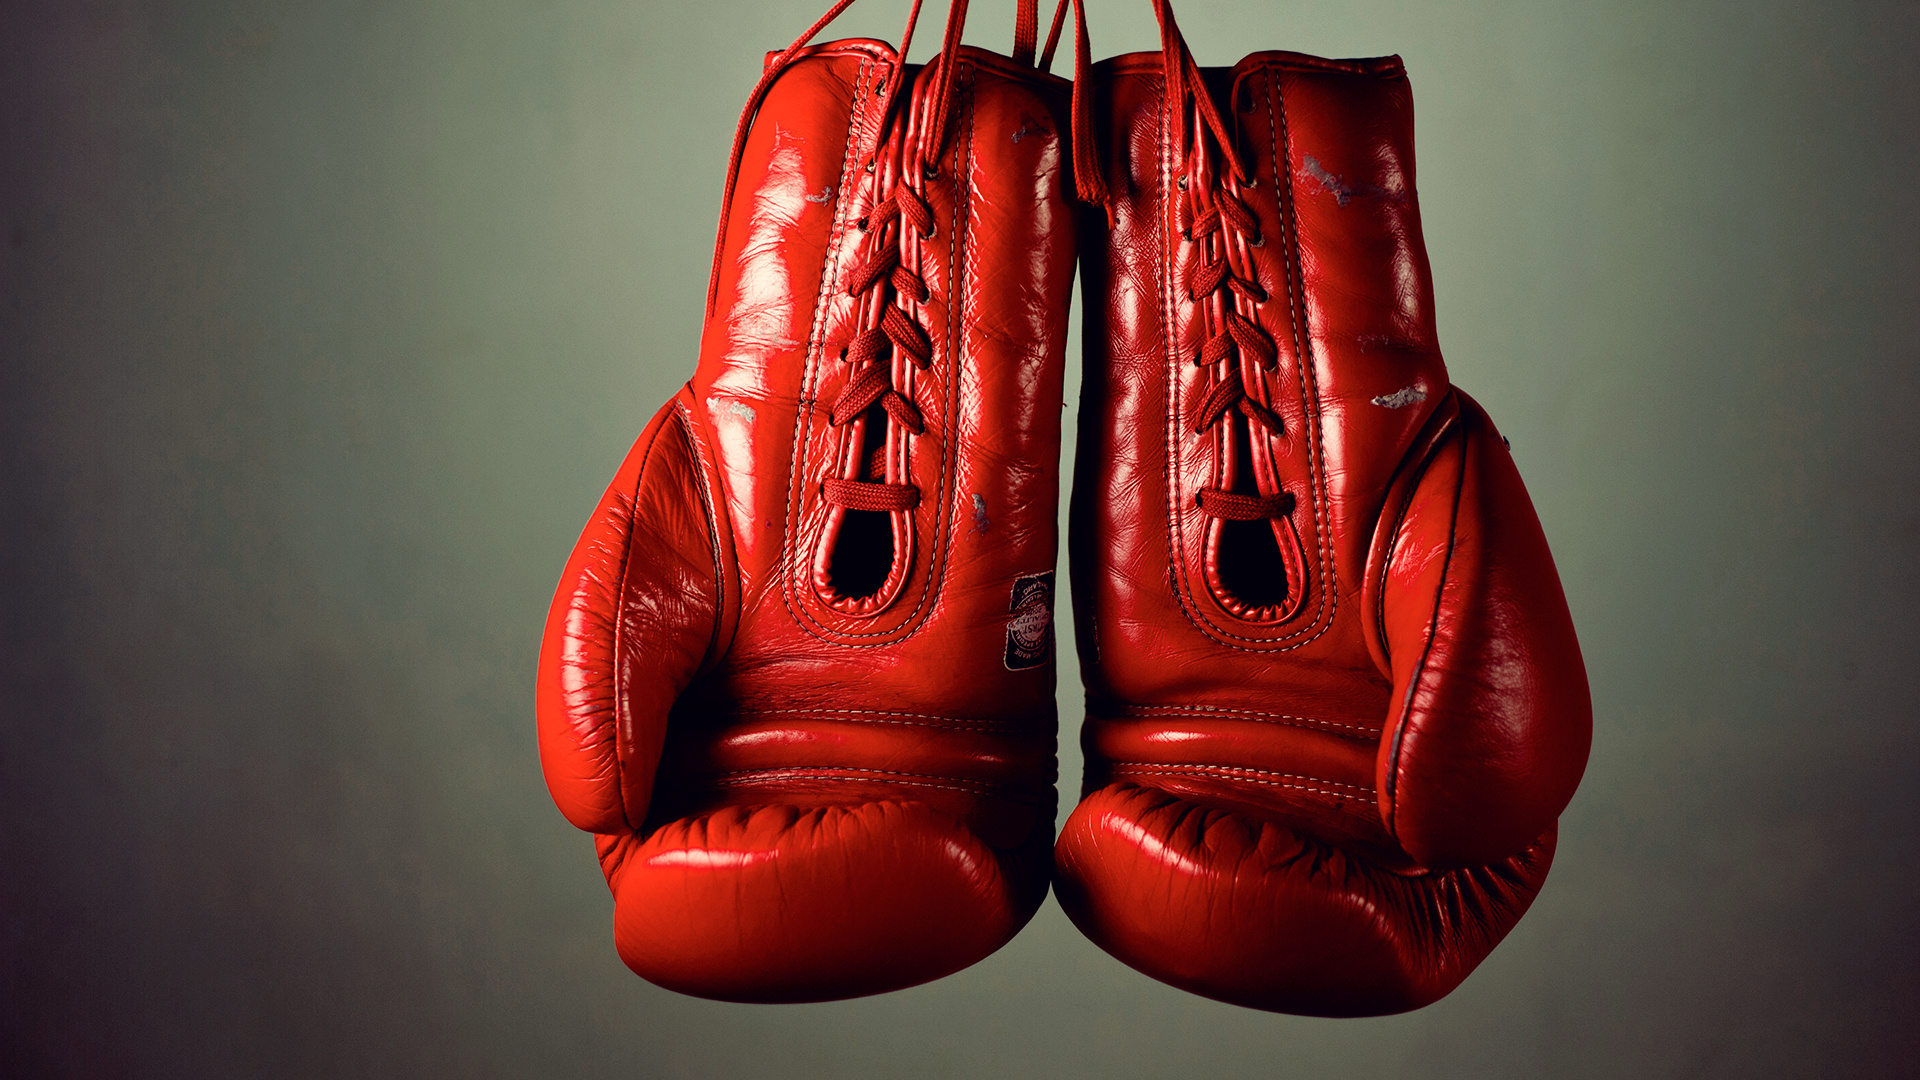 Red hanging boxing gloves, Sports symbol, Powerful image, Fitness inspiration, 1920x1080 Full HD Desktop